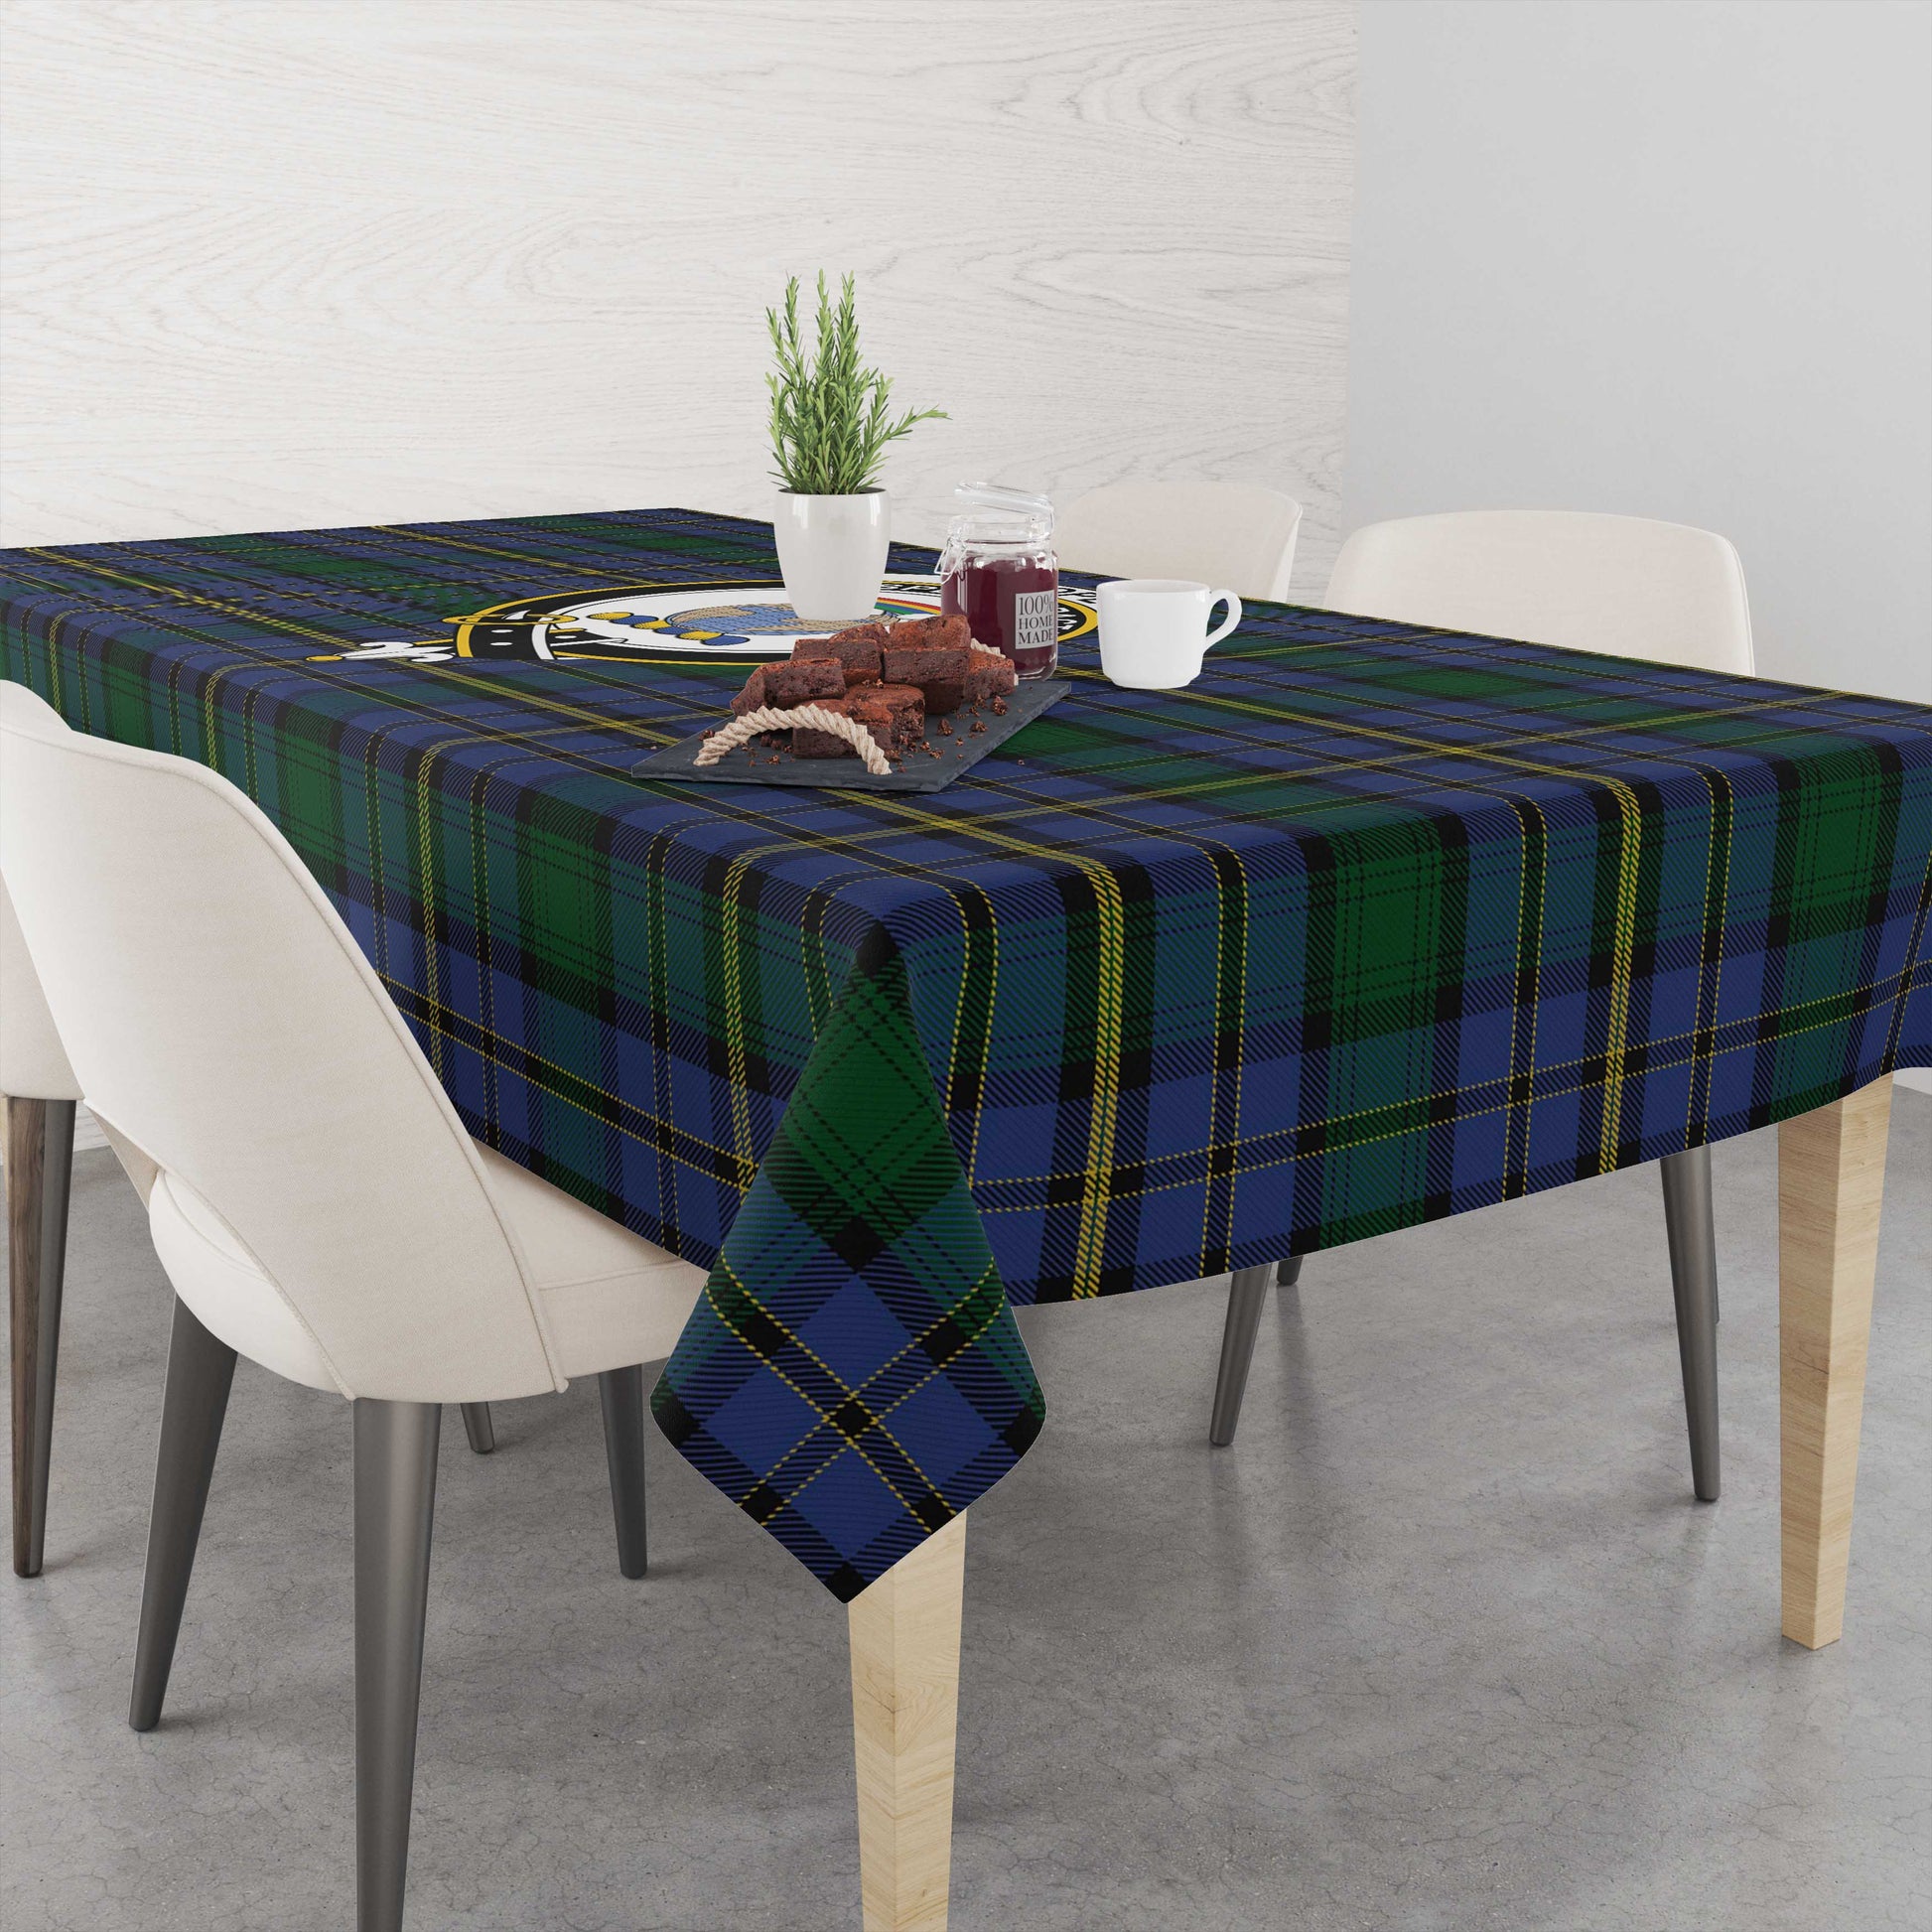 hope-clan-originaux-tatan-tablecloth-with-family-crest